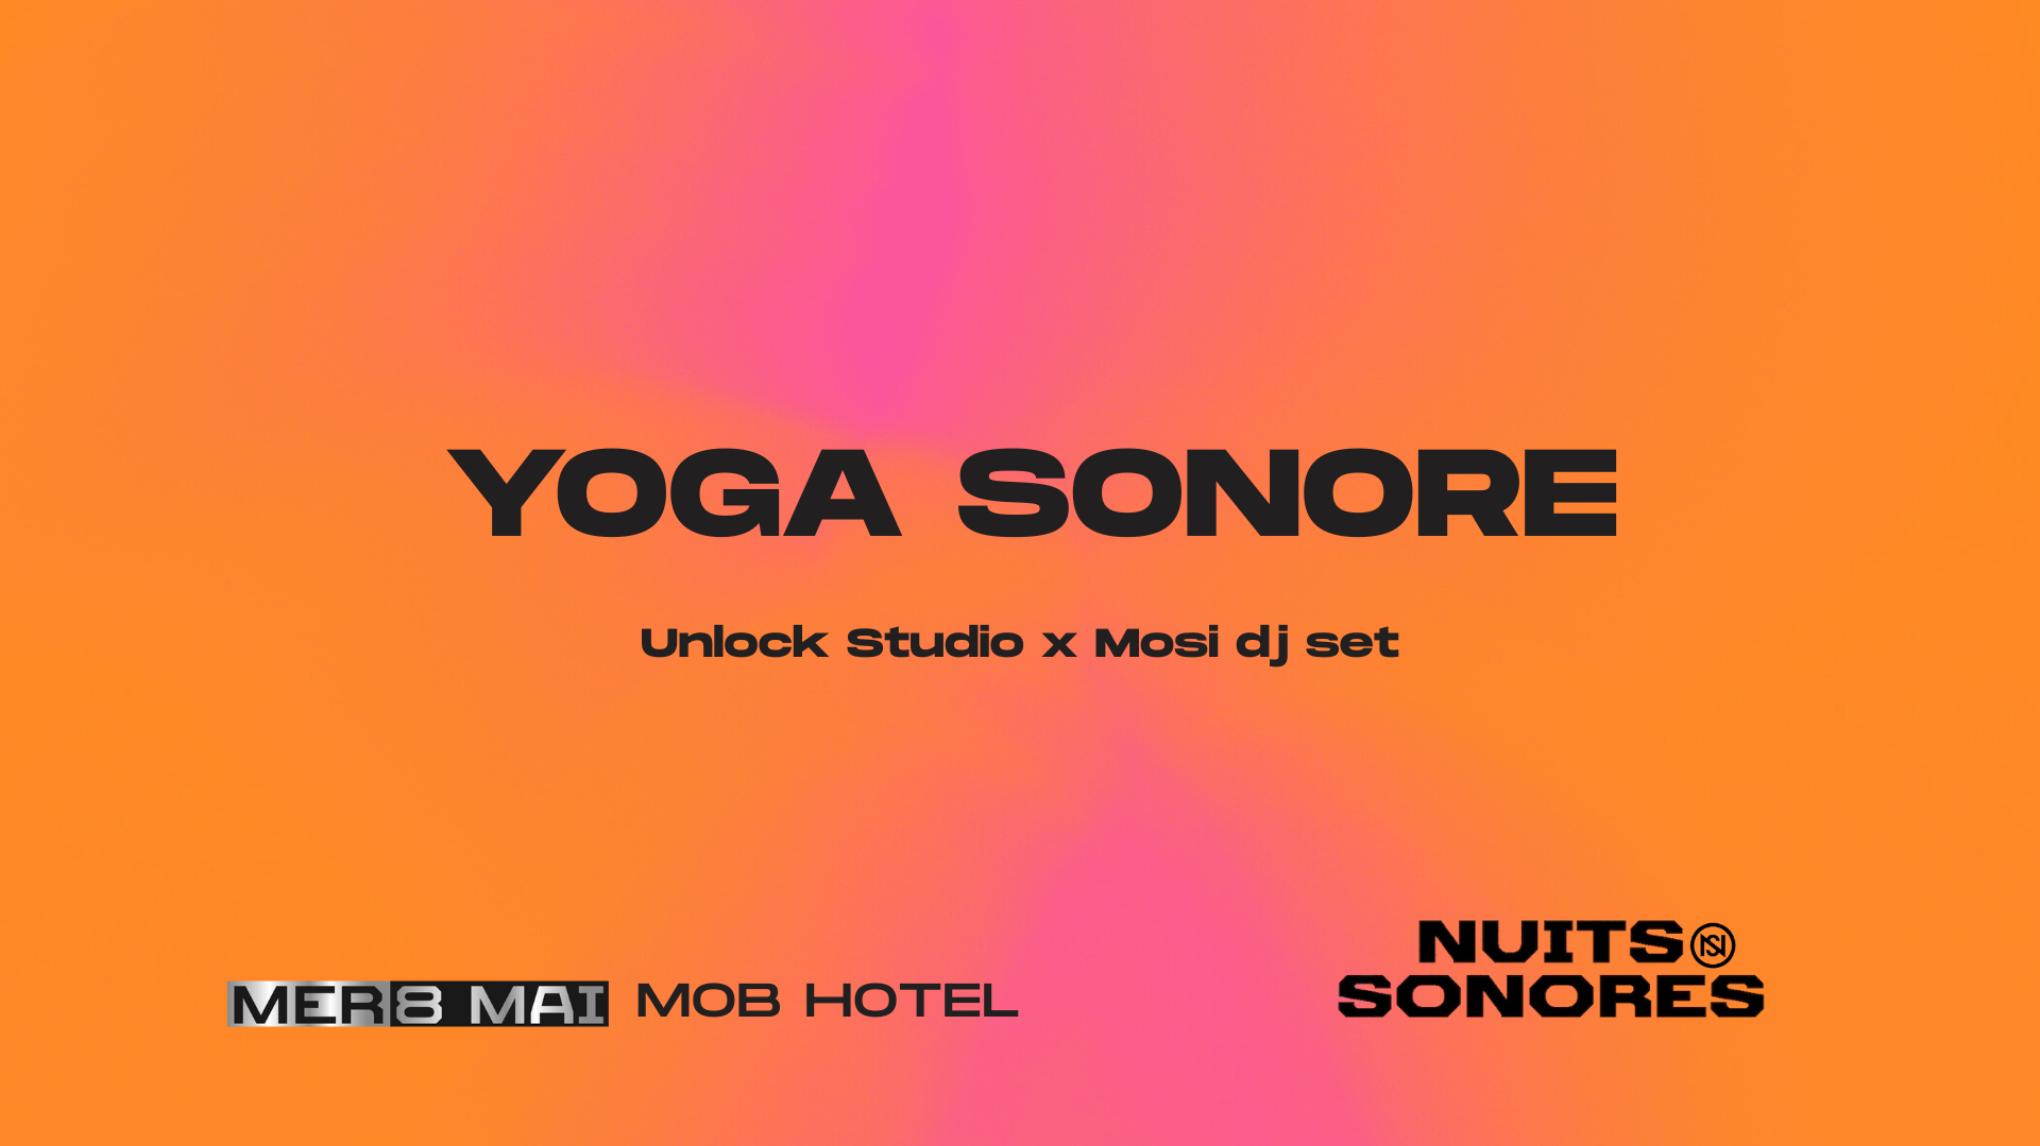 Extra ! Nuits Sonores : Yoga Sonore Session 1 11h - 12h